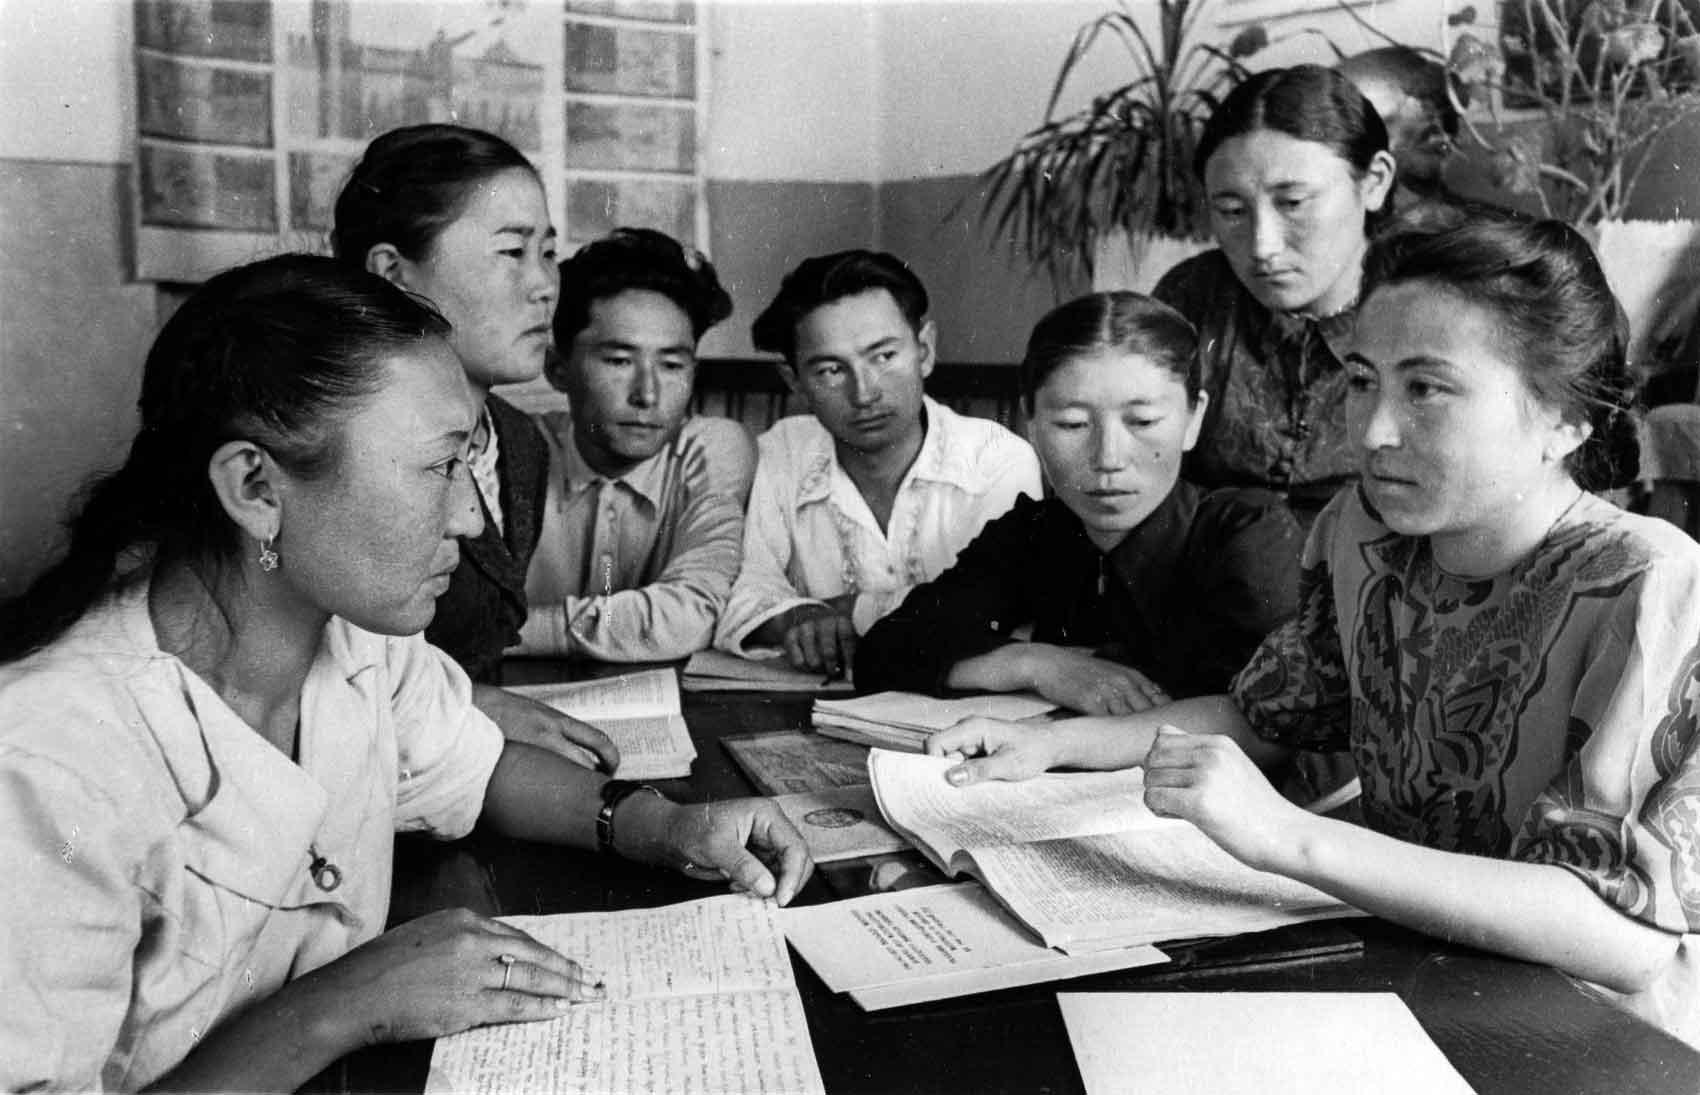 Female instructor with students at Frunze Pedagogical Institute in Kirgiziia